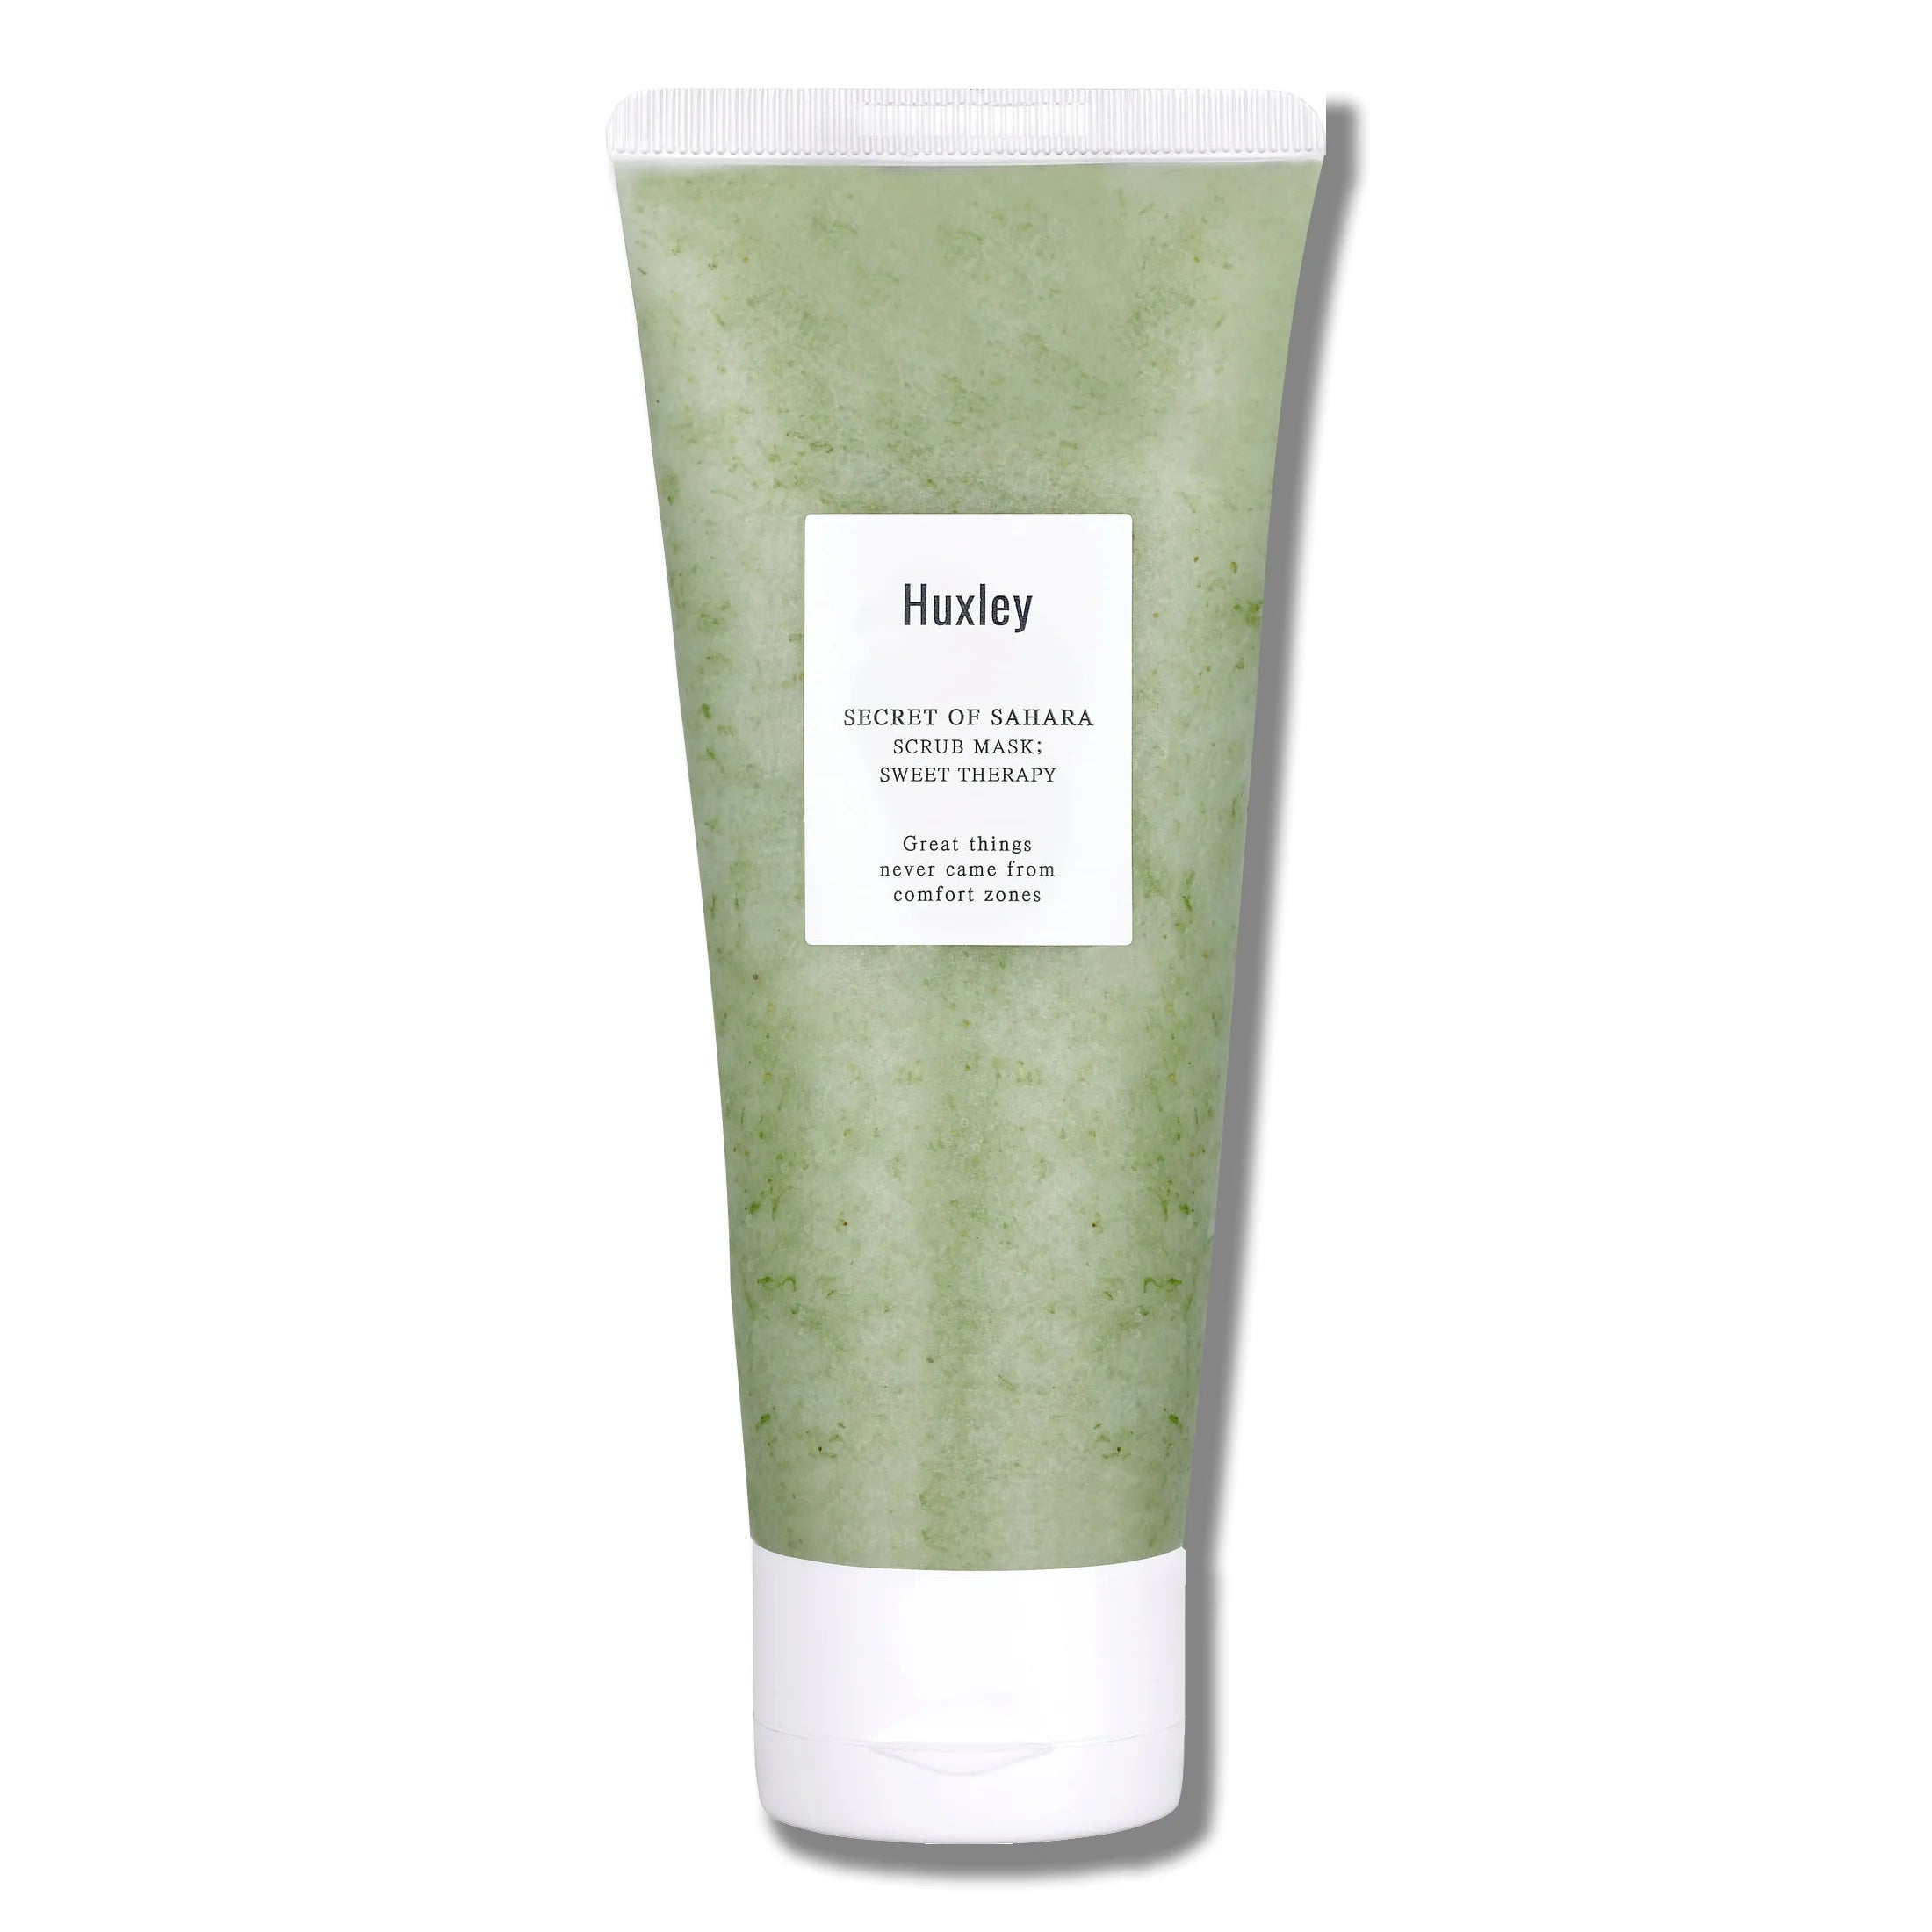 Huxley Sweet Therapy Scrub Mask dry sensitive anti-aging gift for mom  K Beauty World